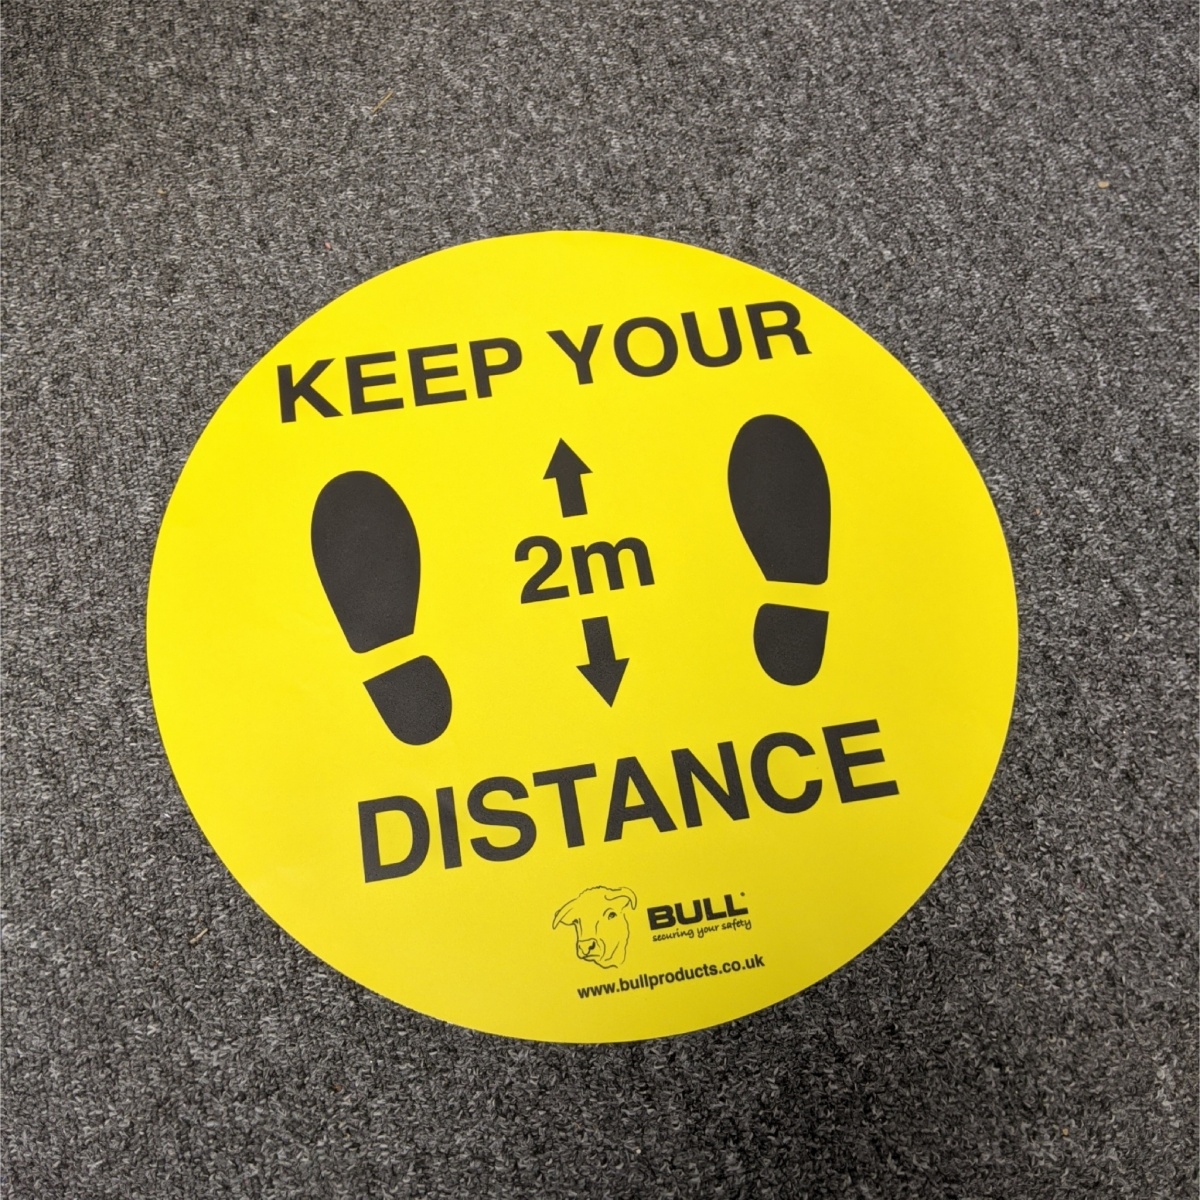 floor stickers used to tell people to leave 2m of space